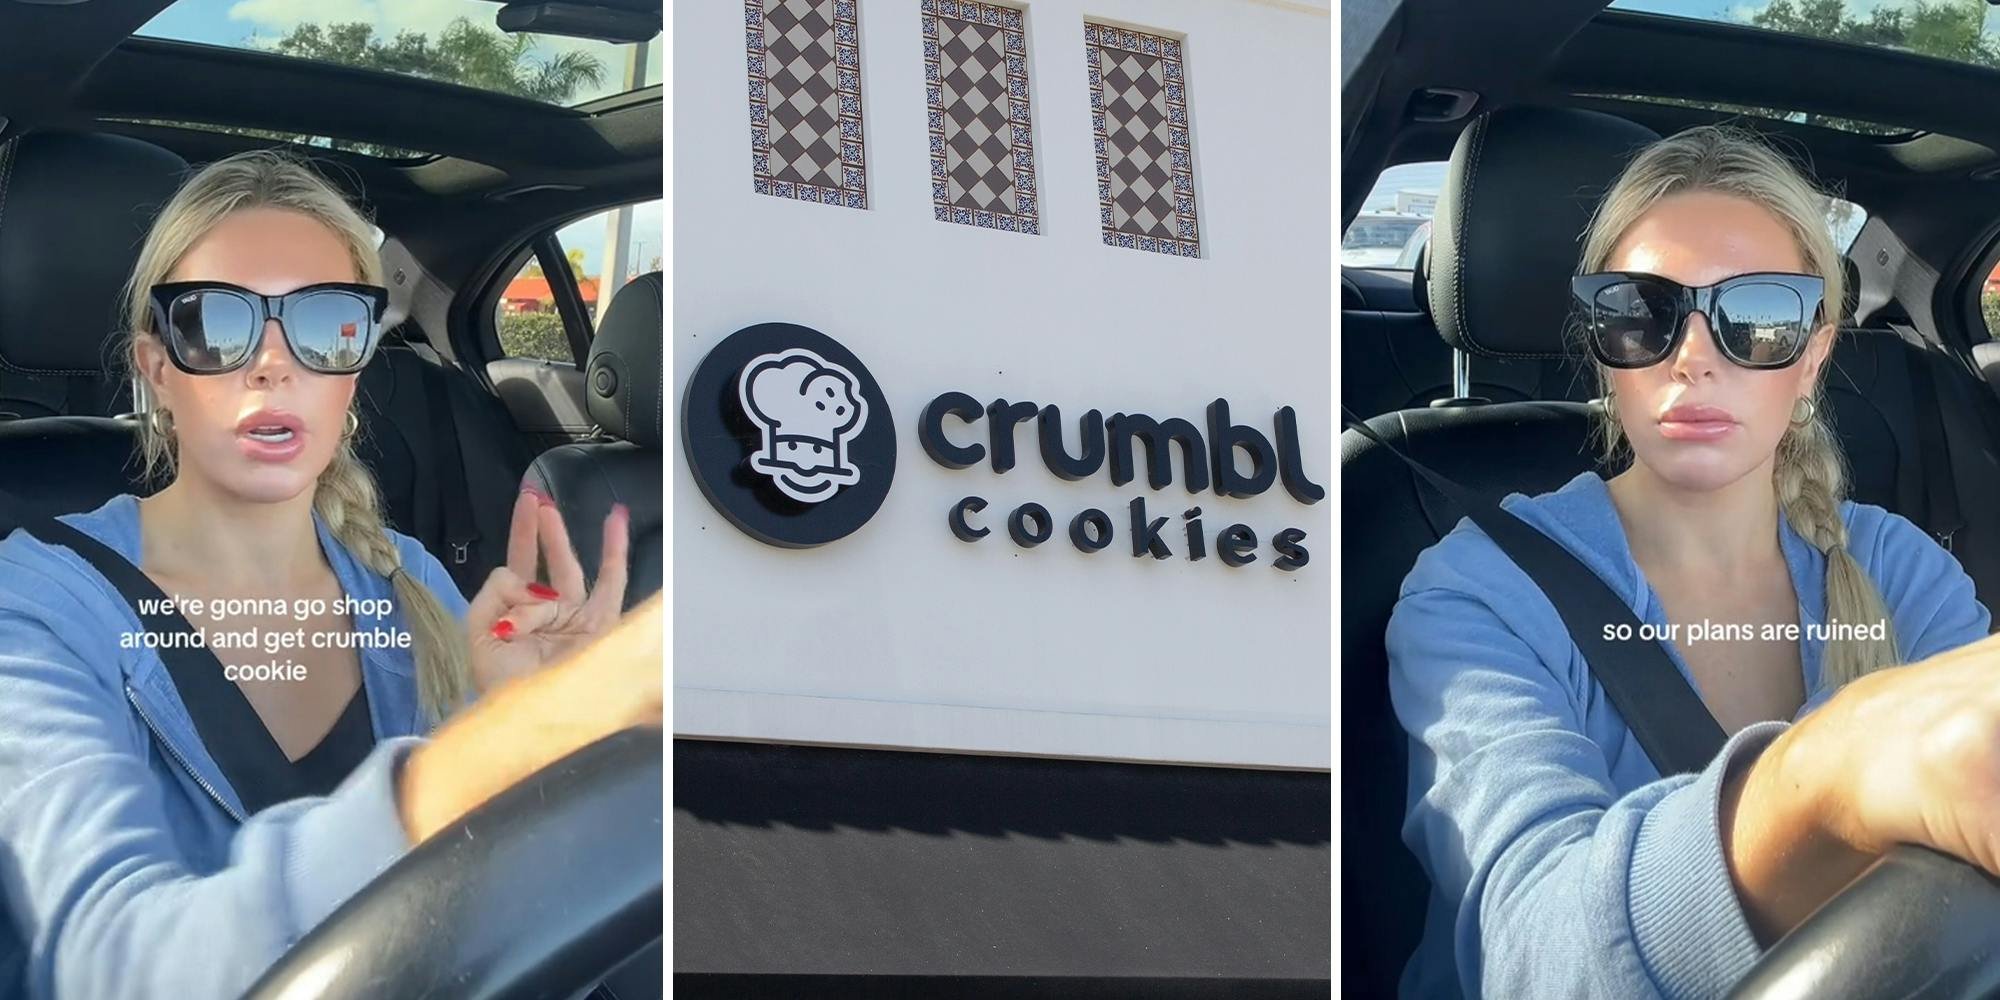 Woman furious at boyfriend over their date to have Crumbl Cookies